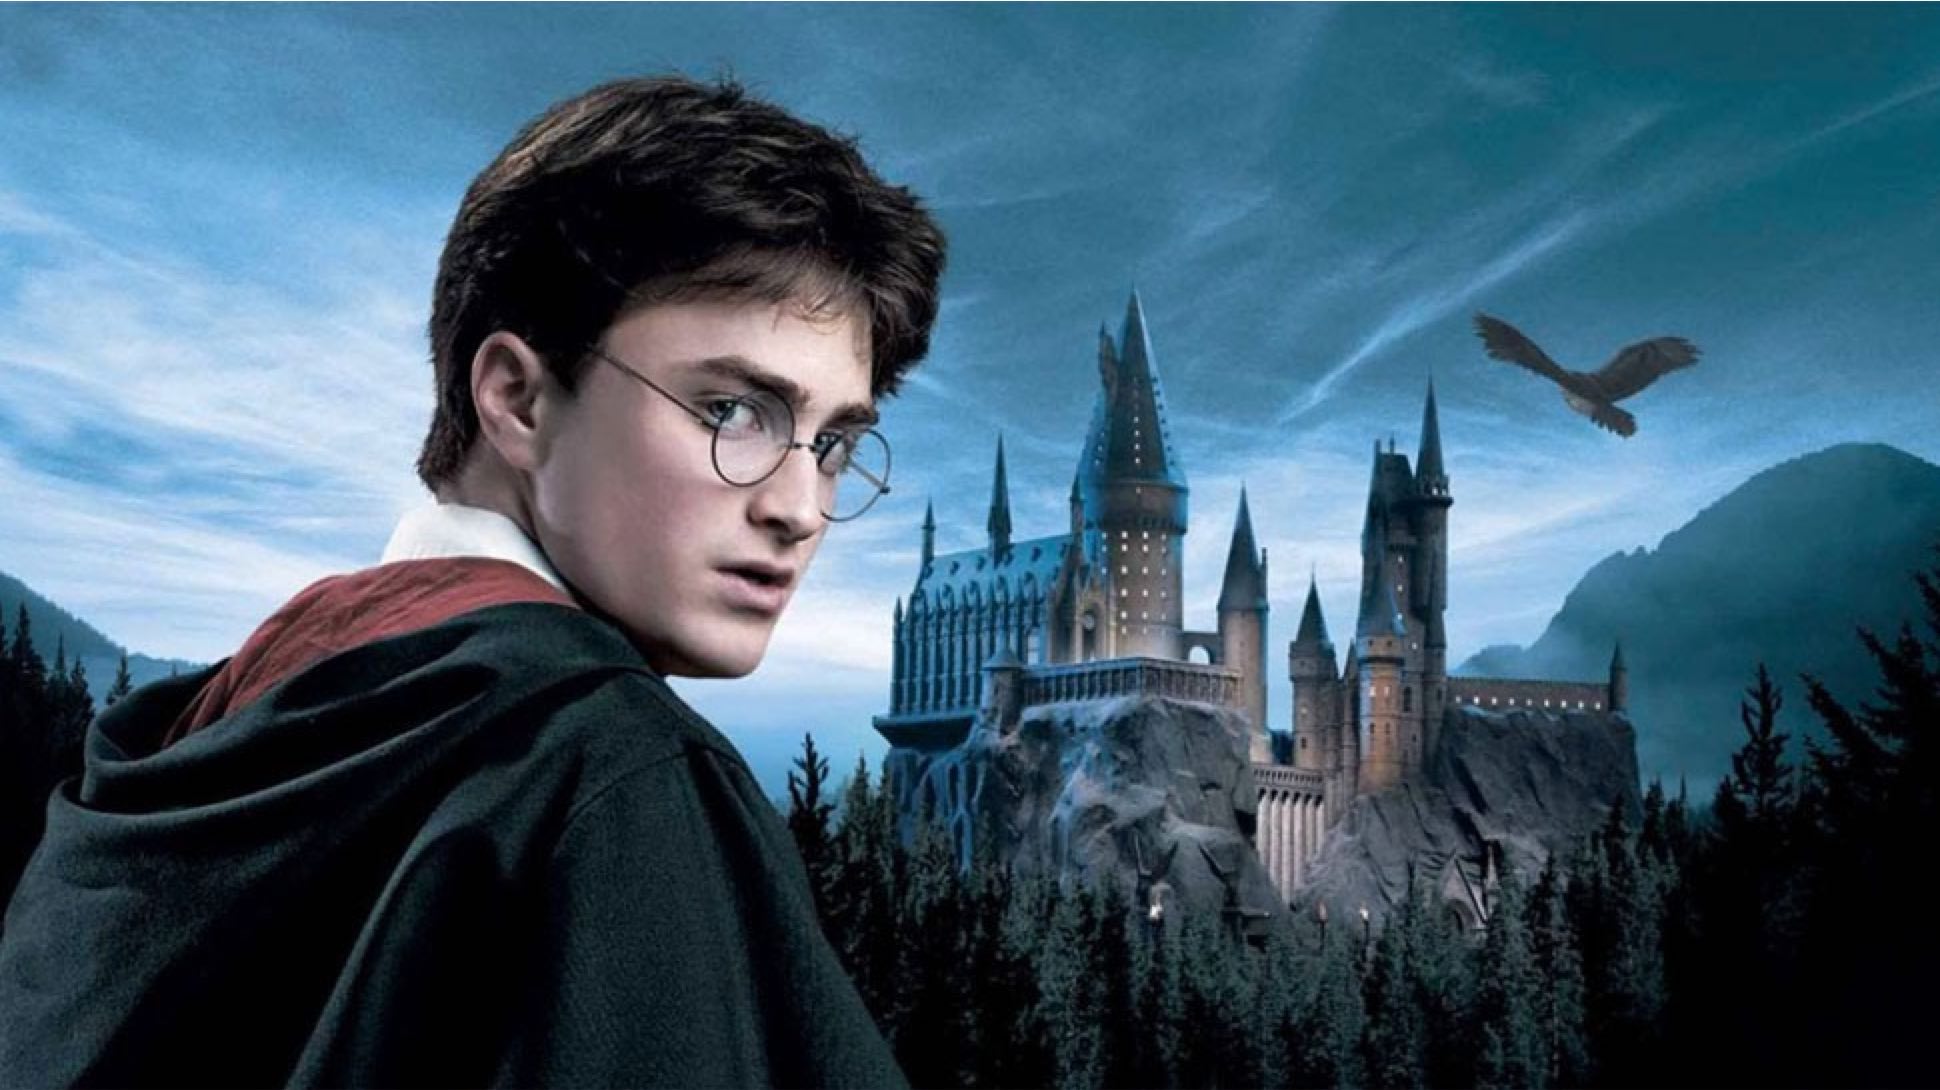 'Harry Potter and the Deathly Hallows Part 2' Trailer #2: The Final